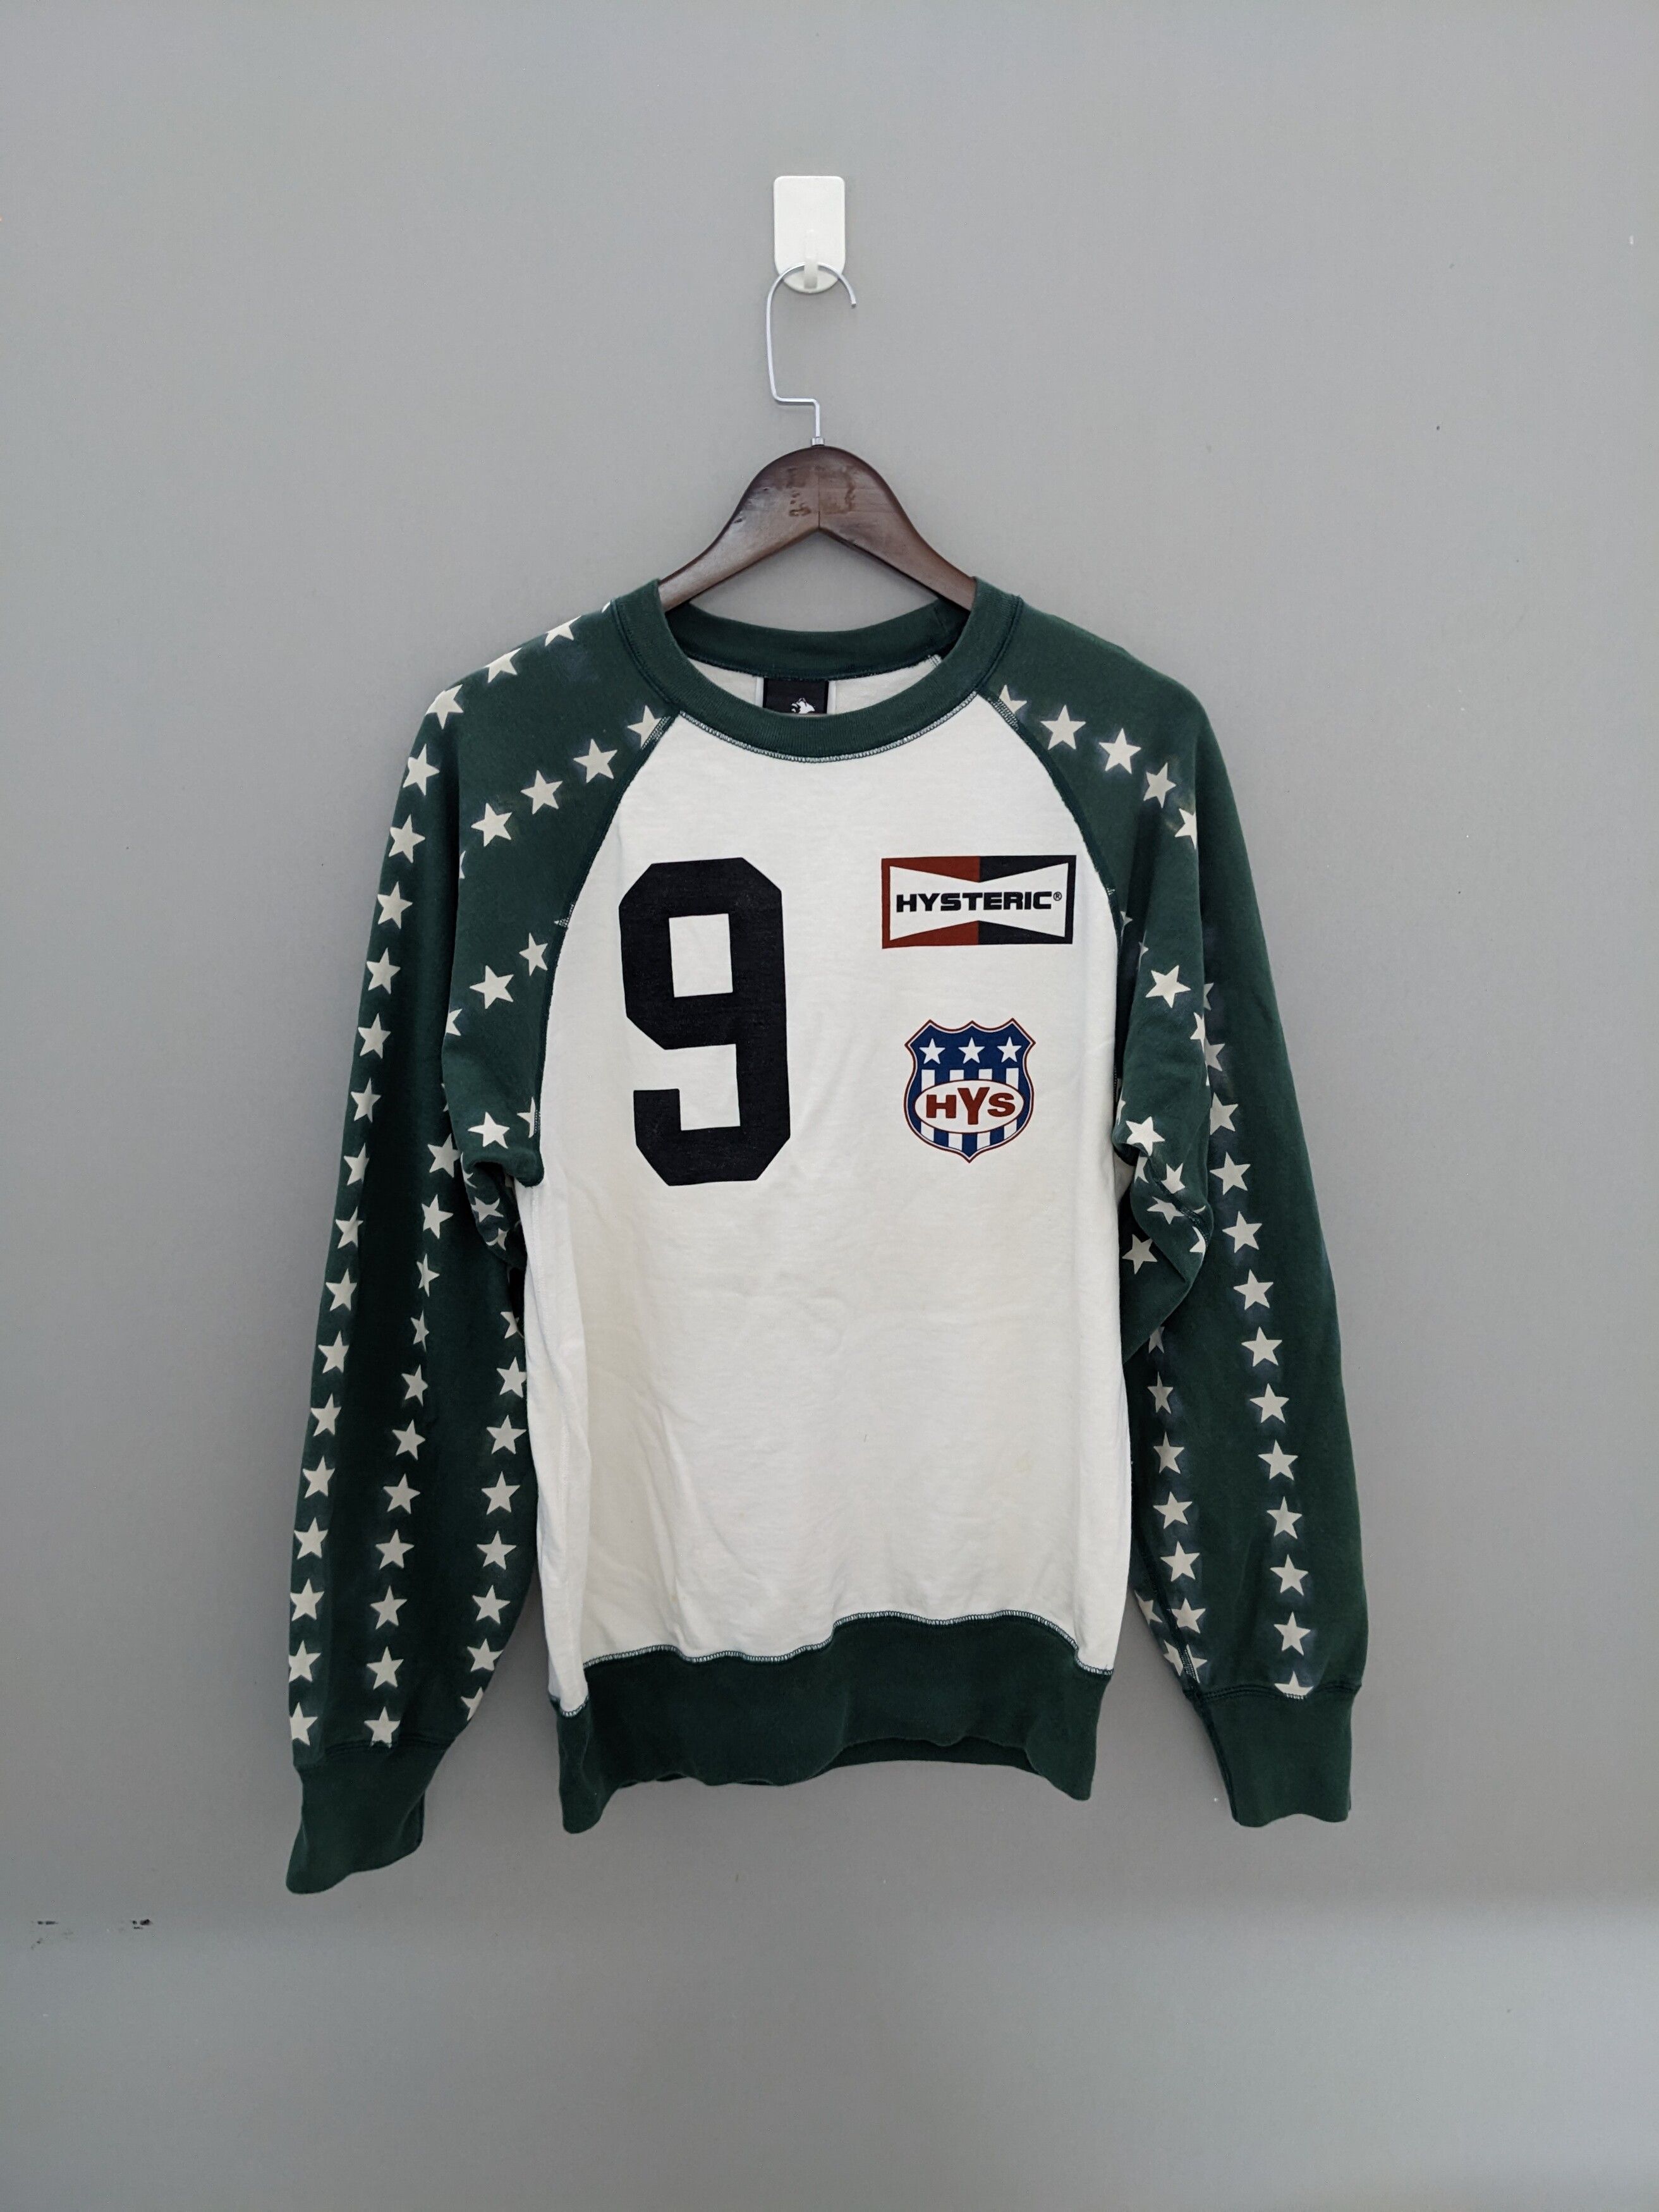 Hysteric Glamour Spellout White Green Stars Sweatshirt - 1